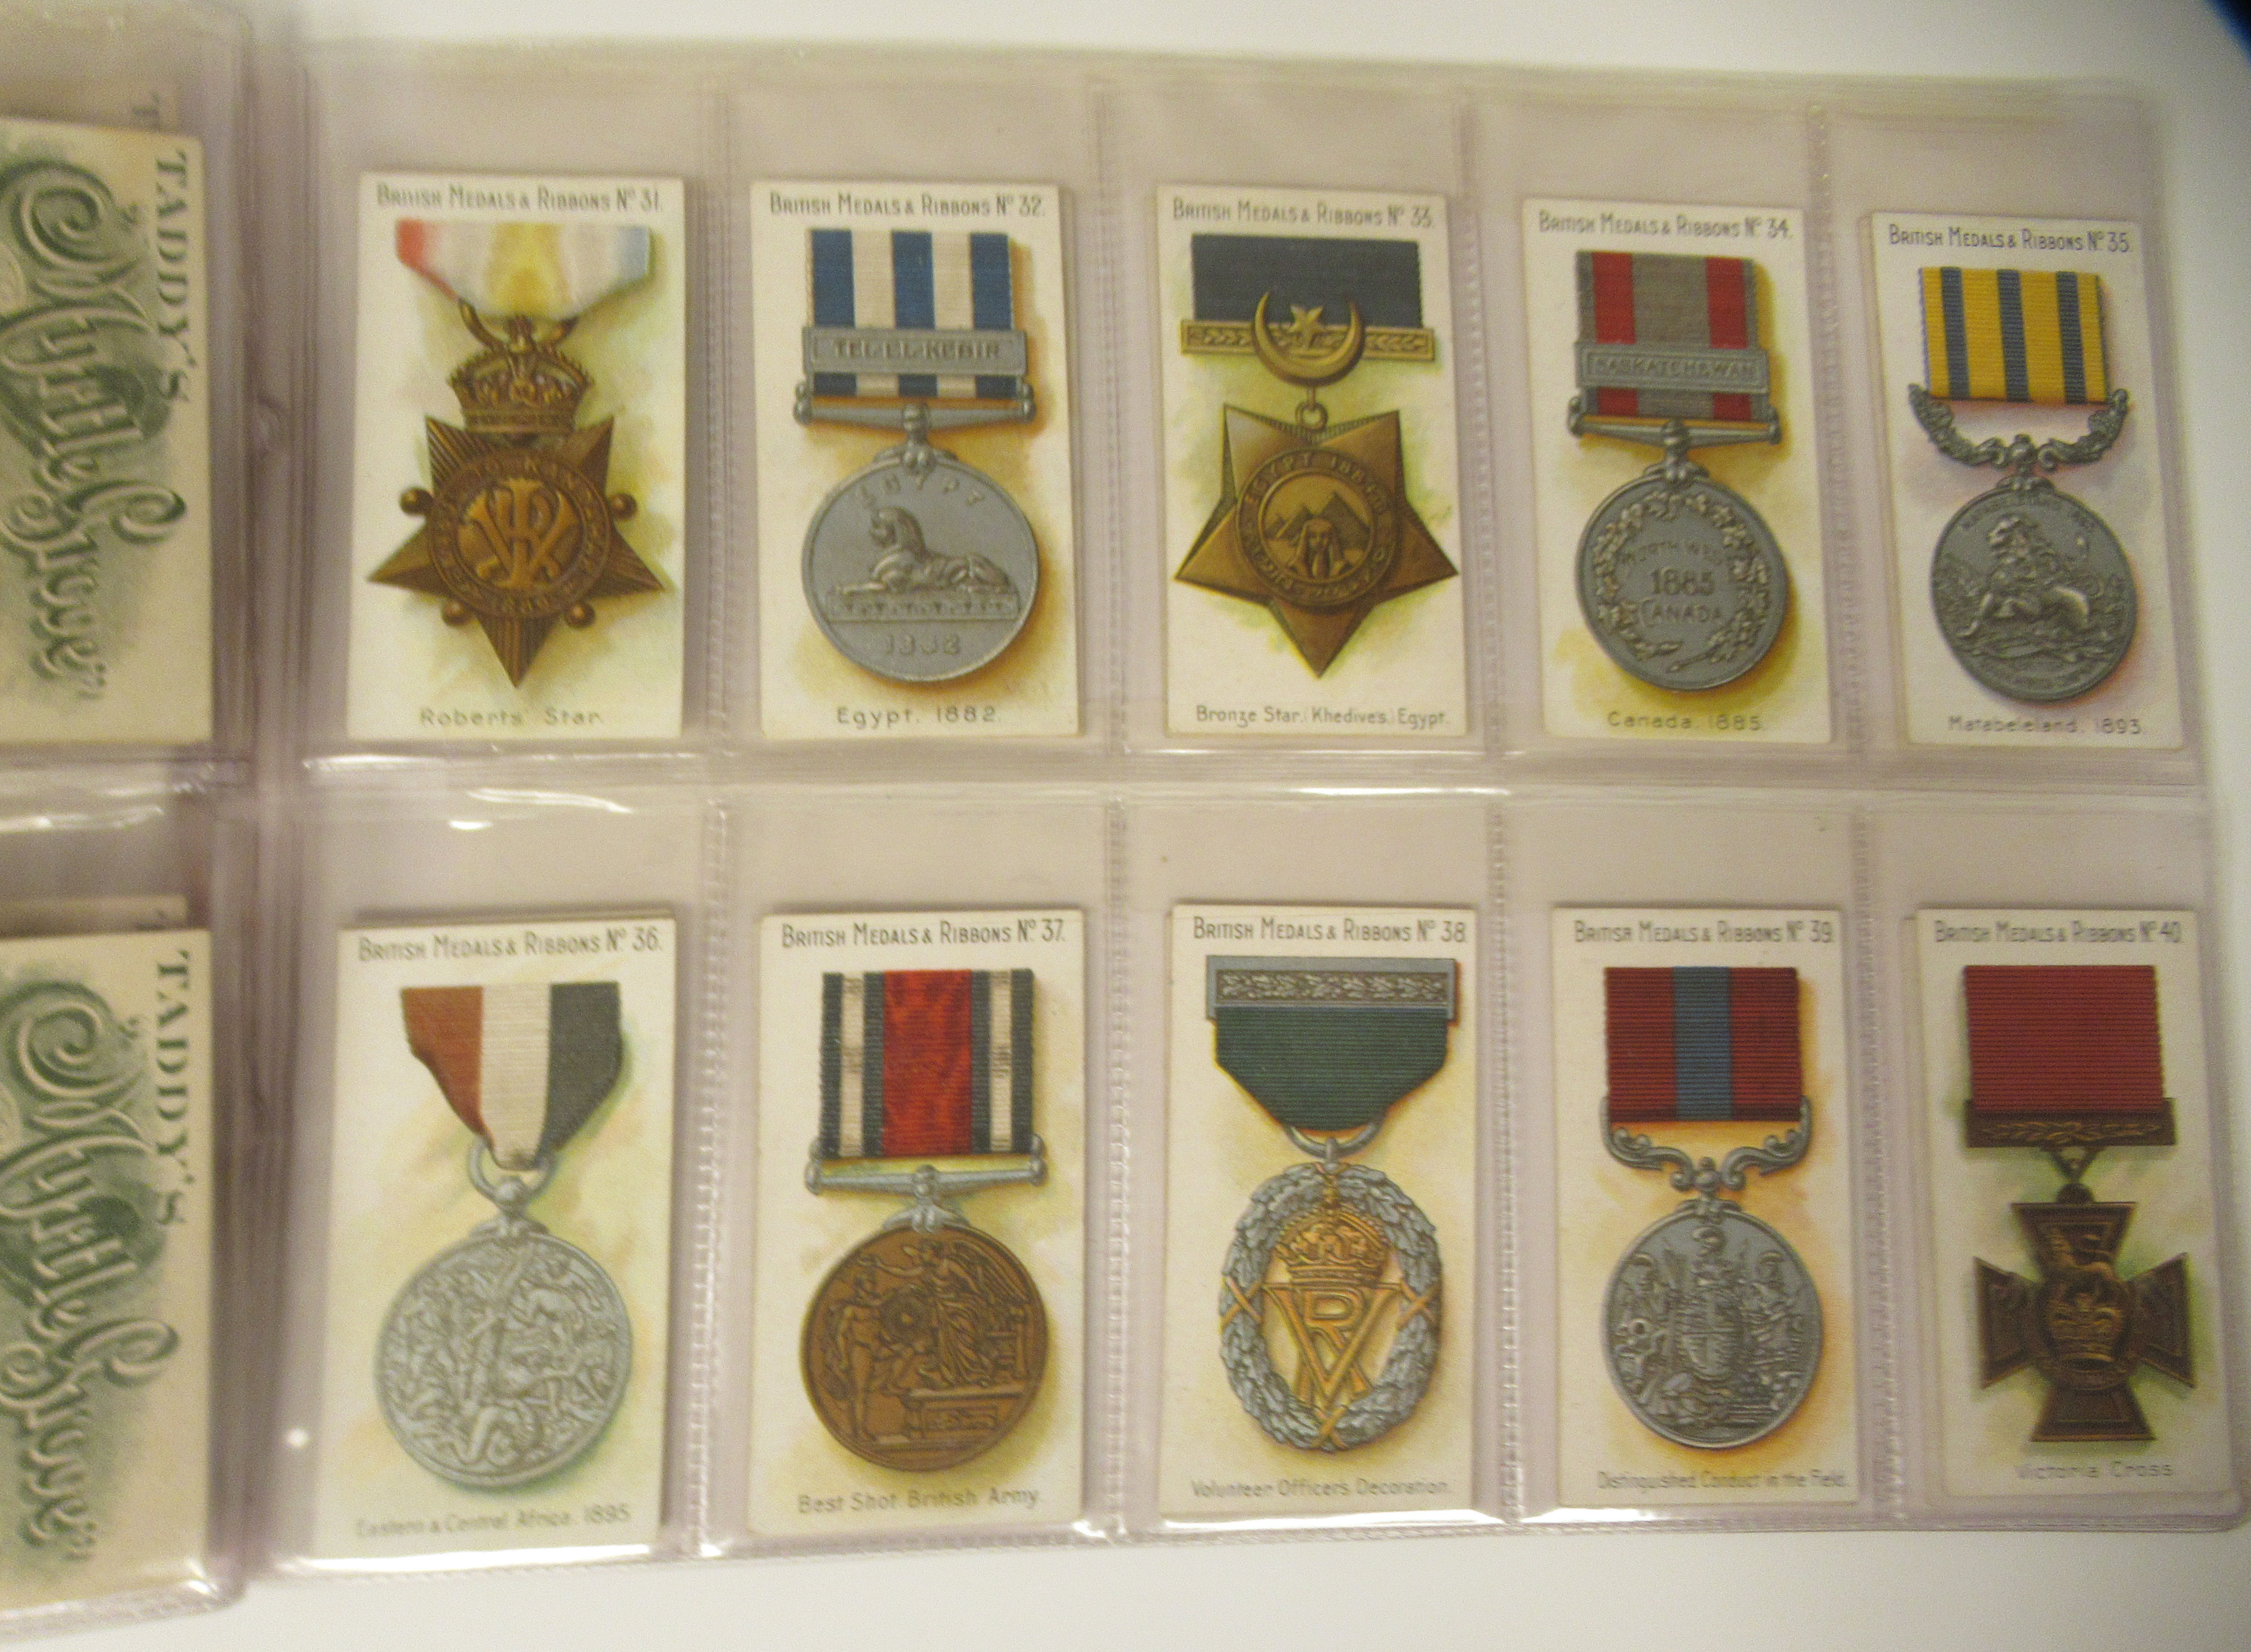 A 1912 set of fifty Taddy & Co cigarette cards 'British Medals & Ribbons' - Image 4 of 6